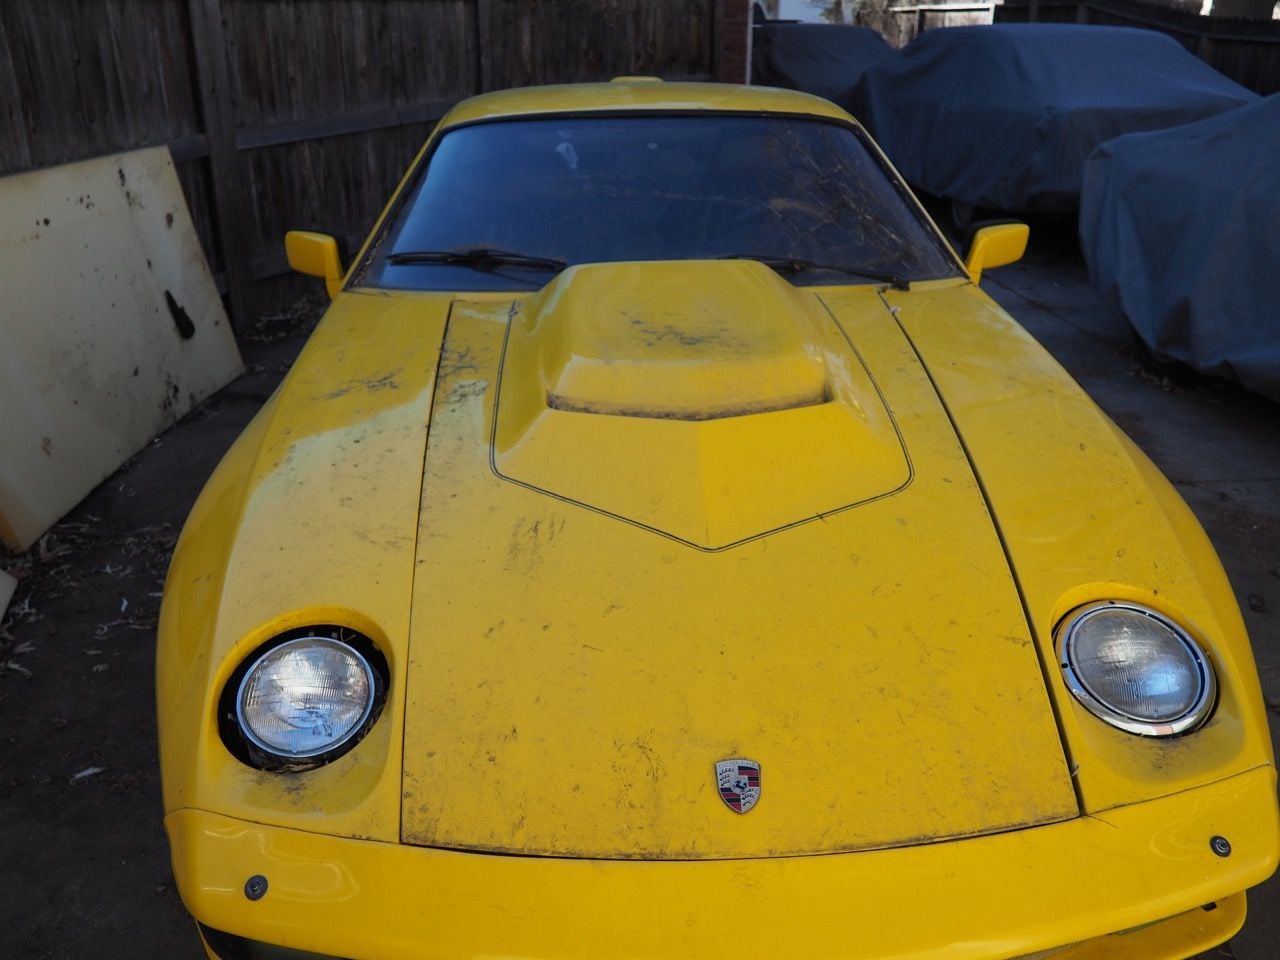 1979 Porsche 928 - 1979 Porsche 928 - Used - VIN 9289201881 - 60,441 Miles - 8 cyl - 2WD - Manual - Coupe - Yellow - Colorado Springs, CO 80906, United States